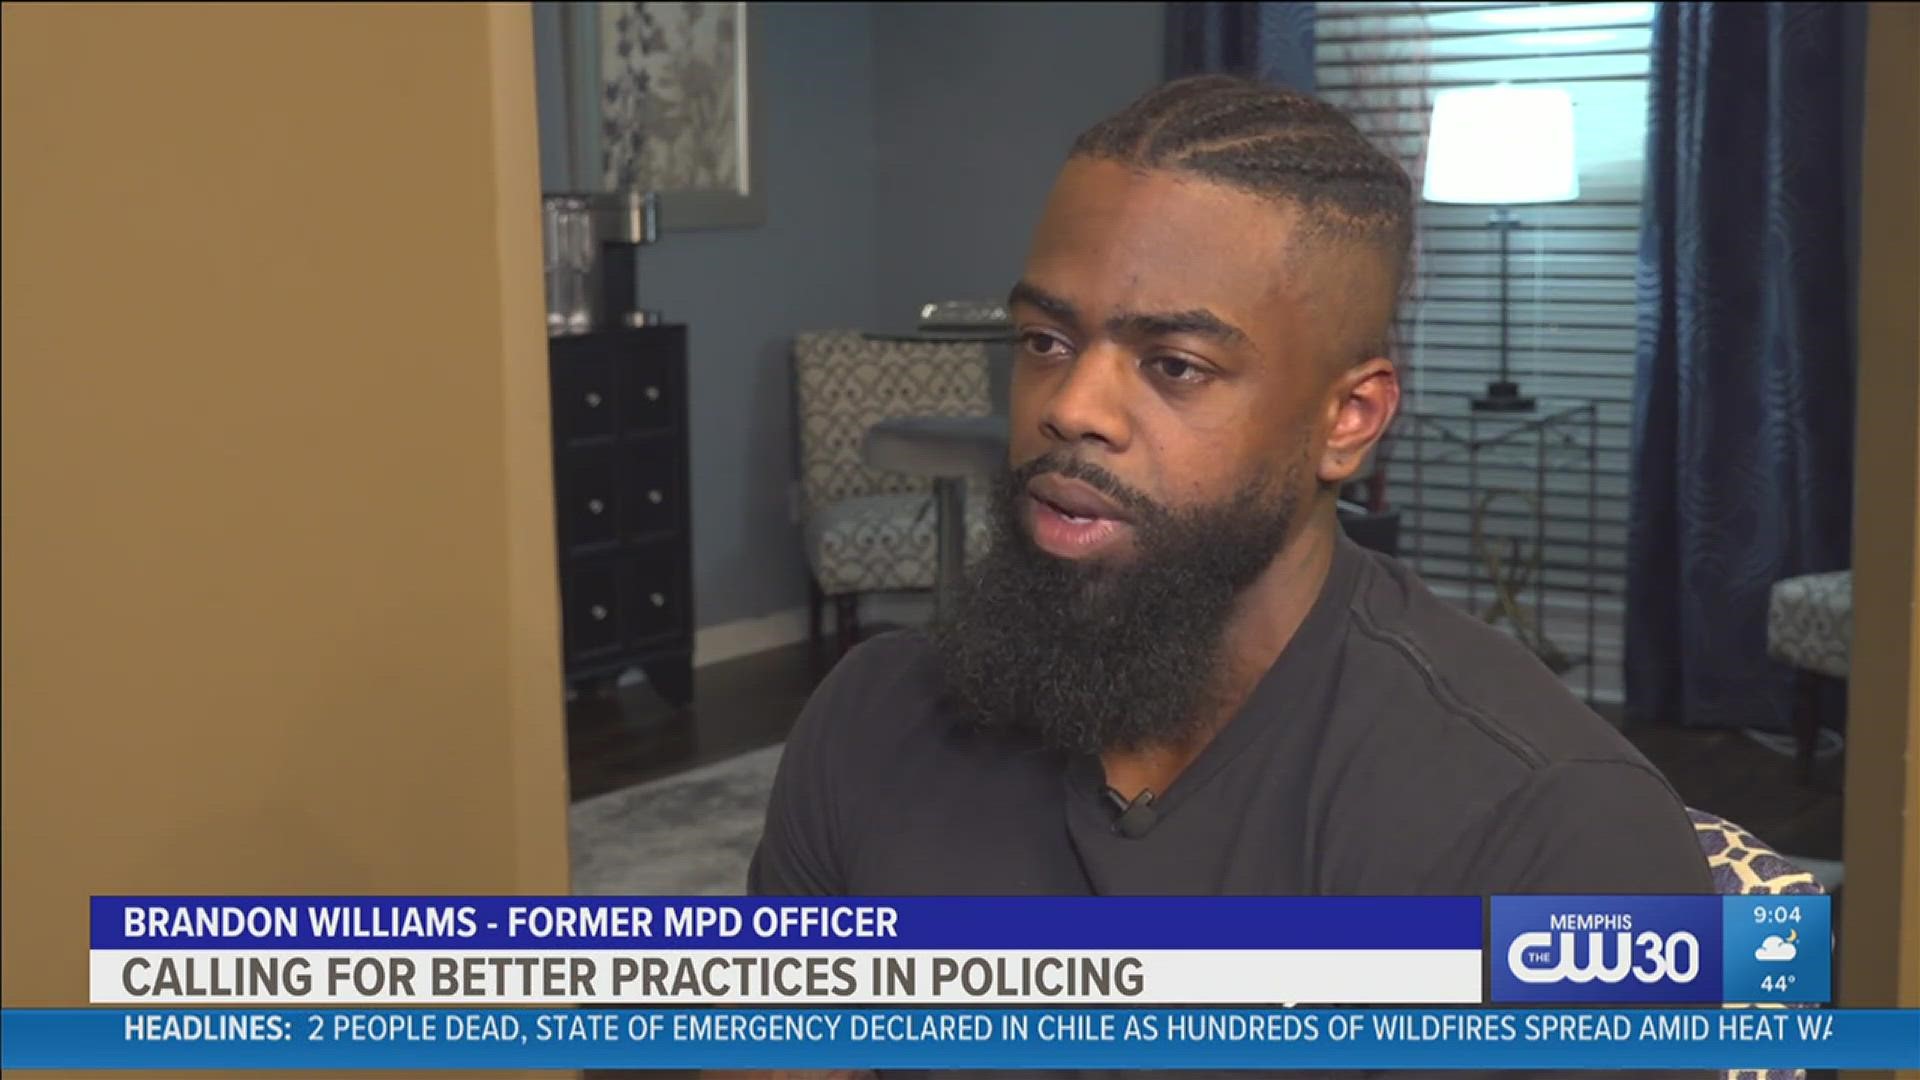 "There is a decency of humanity that every human is supposed to have towards another person regardless," former MPD officer Brandon Williams said.